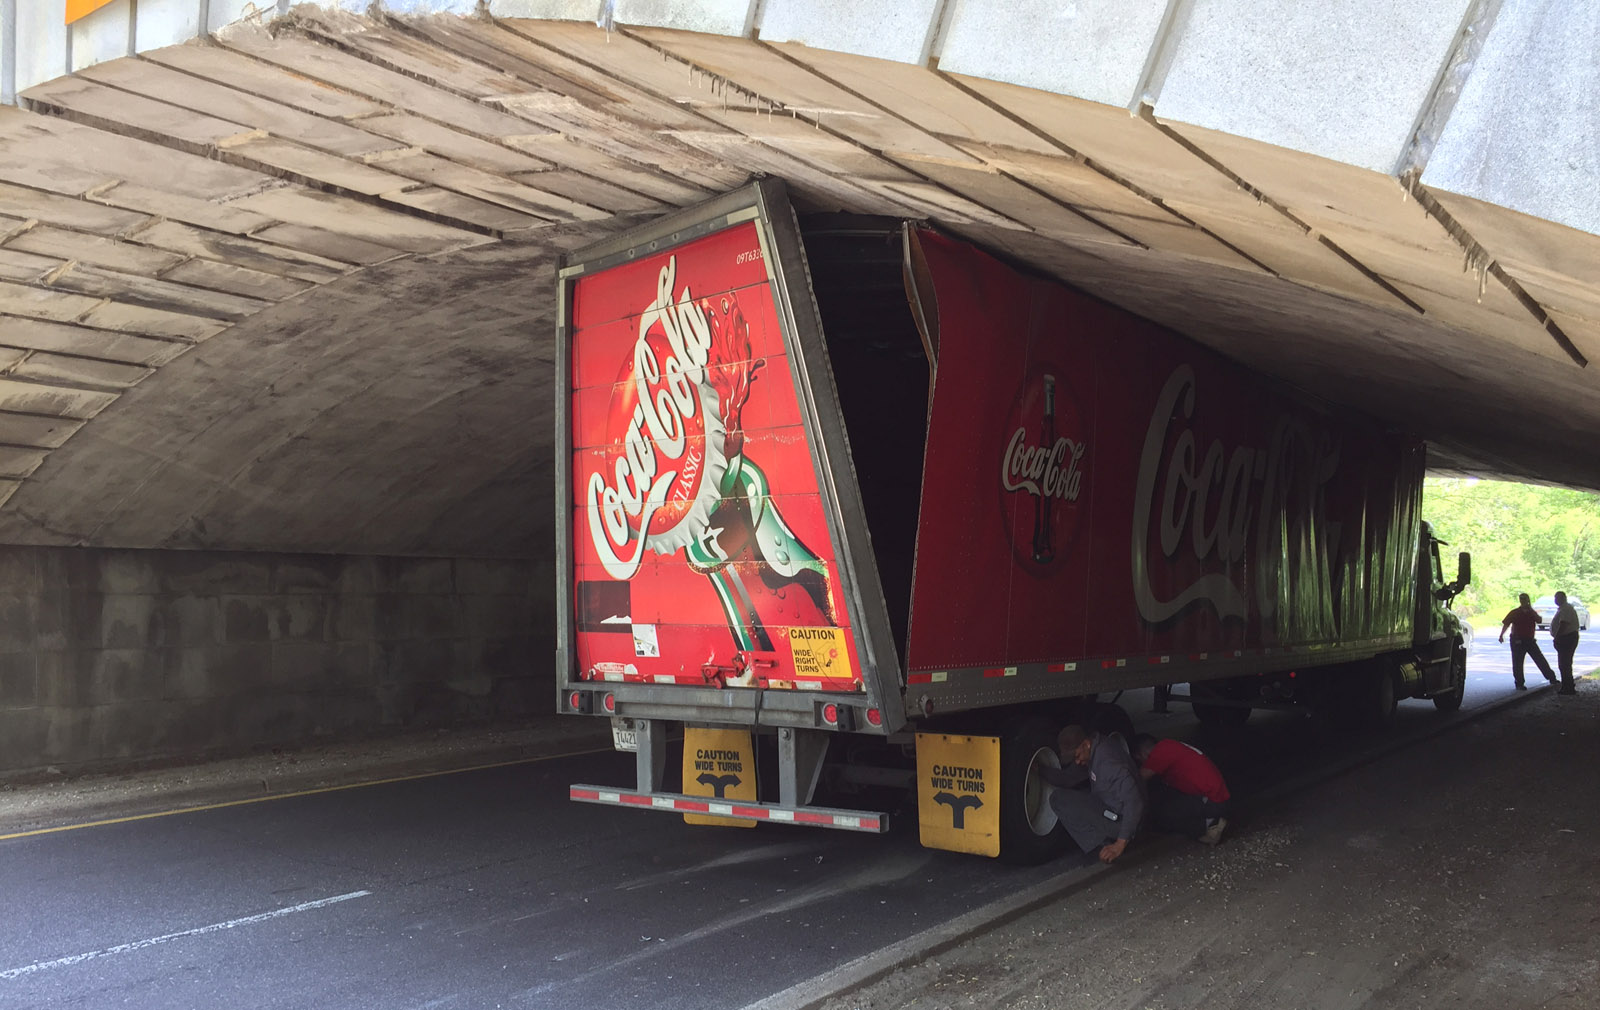 The entire length of a Coca-Cola truck is wedged beneath the Memorial Bridge along the George Washington Memorial Parkway Tuesday afternoon.  (WTOP/Jim Battagliese)